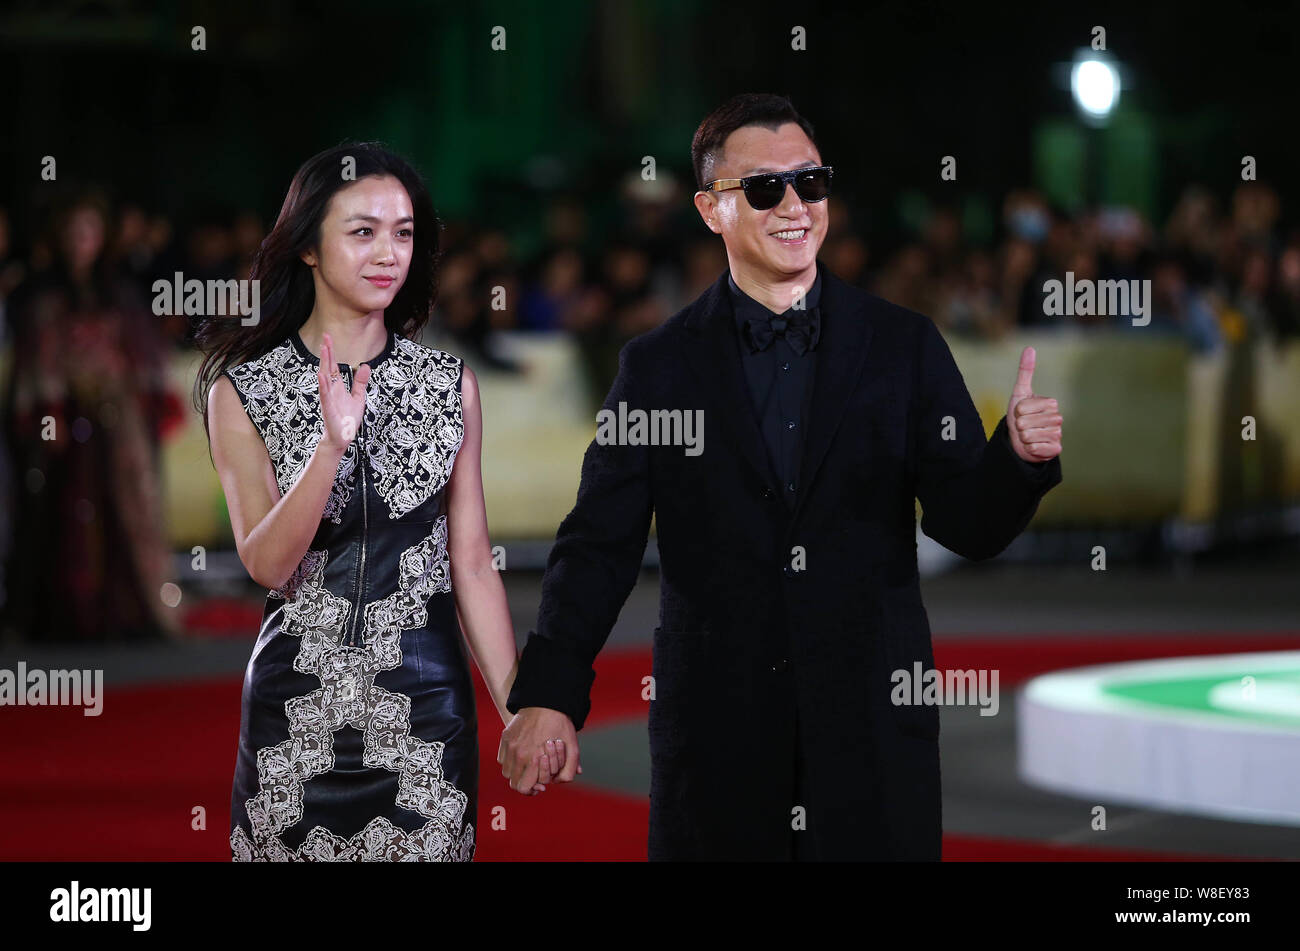 Chinese actress Tang Wei, left, and actor Sun Honglei wave as they arrive at the red carpet for the 5th International Theatre Academy Award (Acting Aw Stock Photo